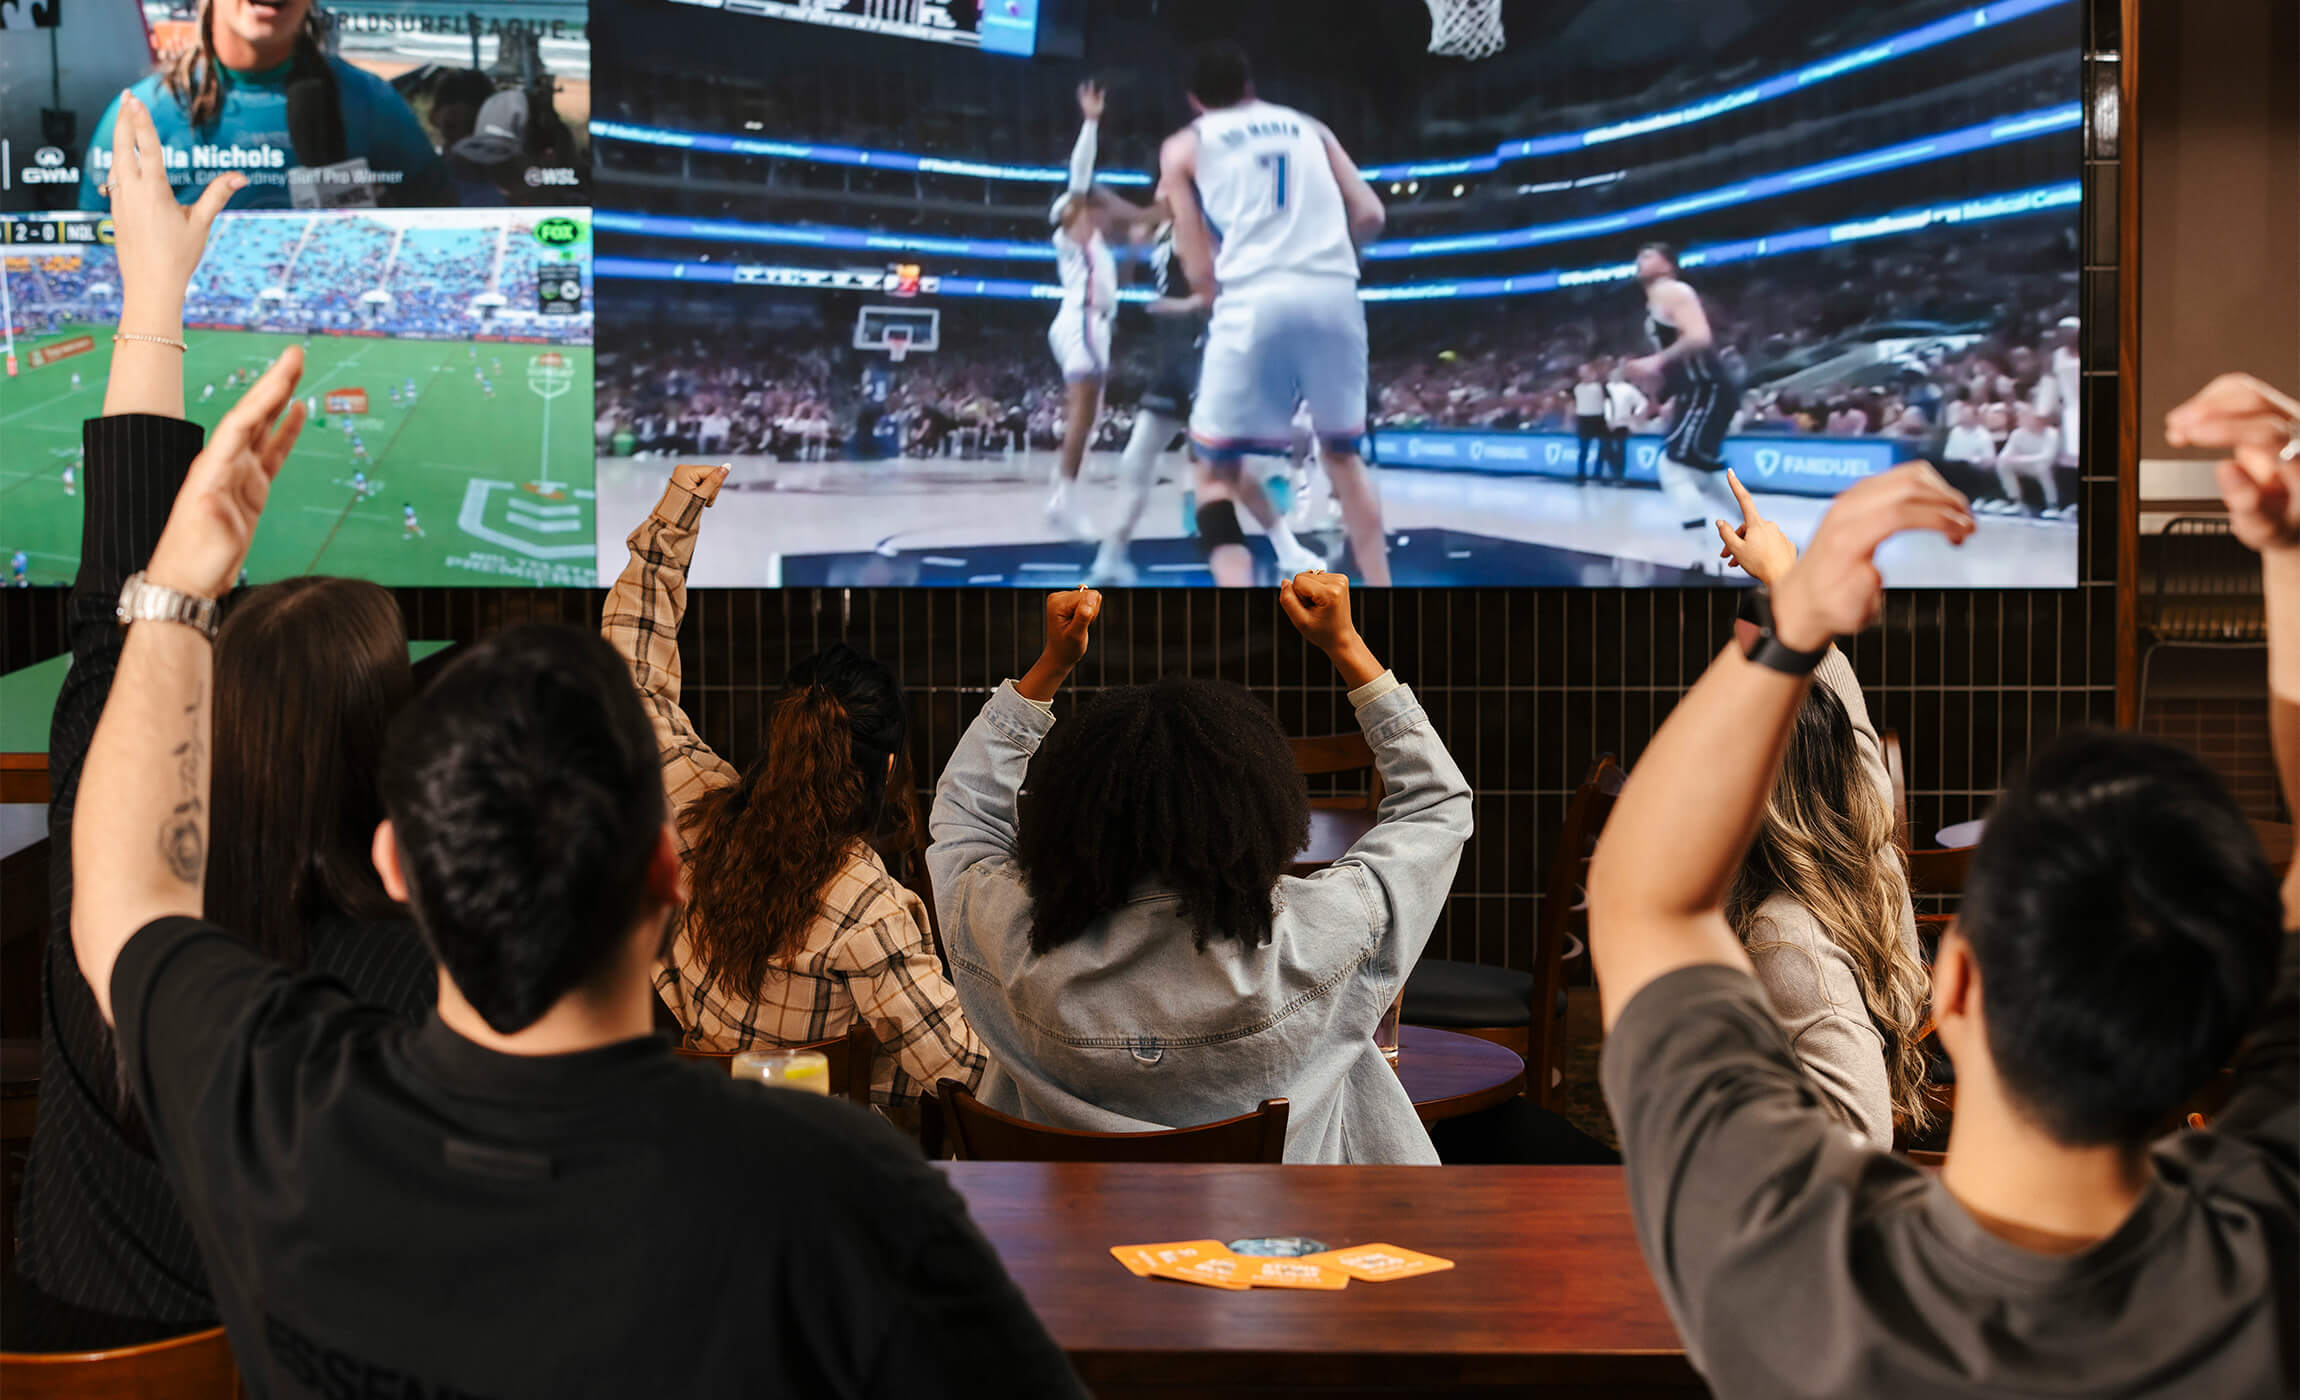 A lively crowd gathered around a TV, engrossed in a basketball game. Excitement fills the air as everyone cheers for their favorite team.